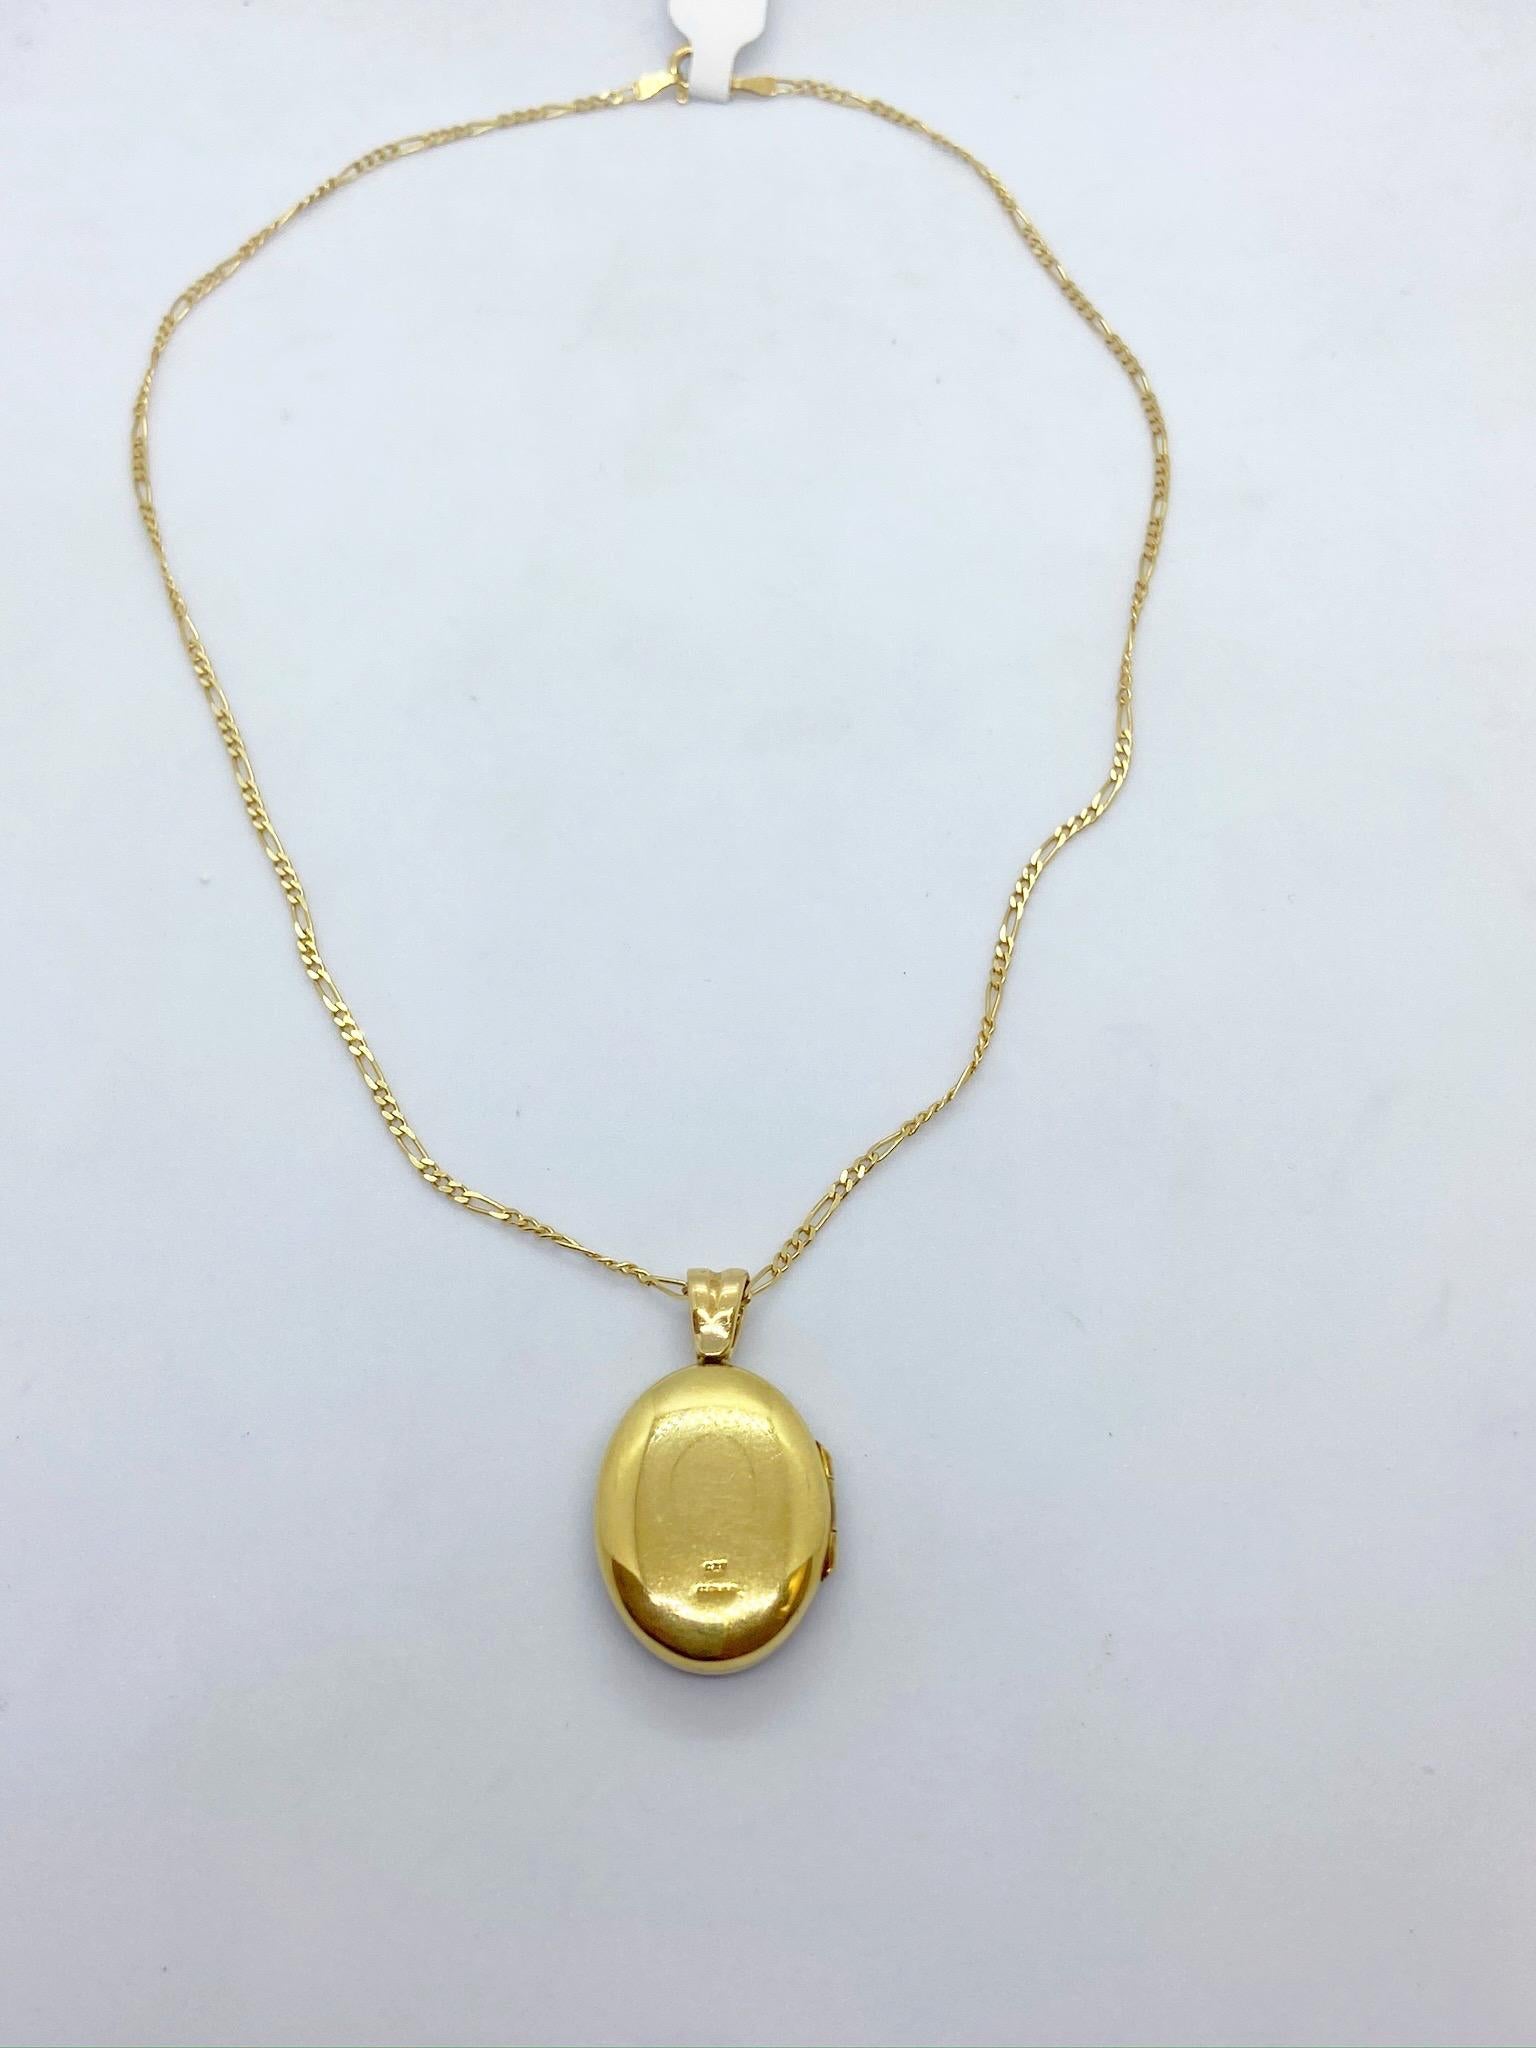 18 karat yellow gold locket crafted by Deakin & Francis, England's oldest family jewelers since 1786.
The oval locket's front is a guicholled navy blue enamel. The center has a gold starburst motif set with round brilliant Diamonds. The back is a